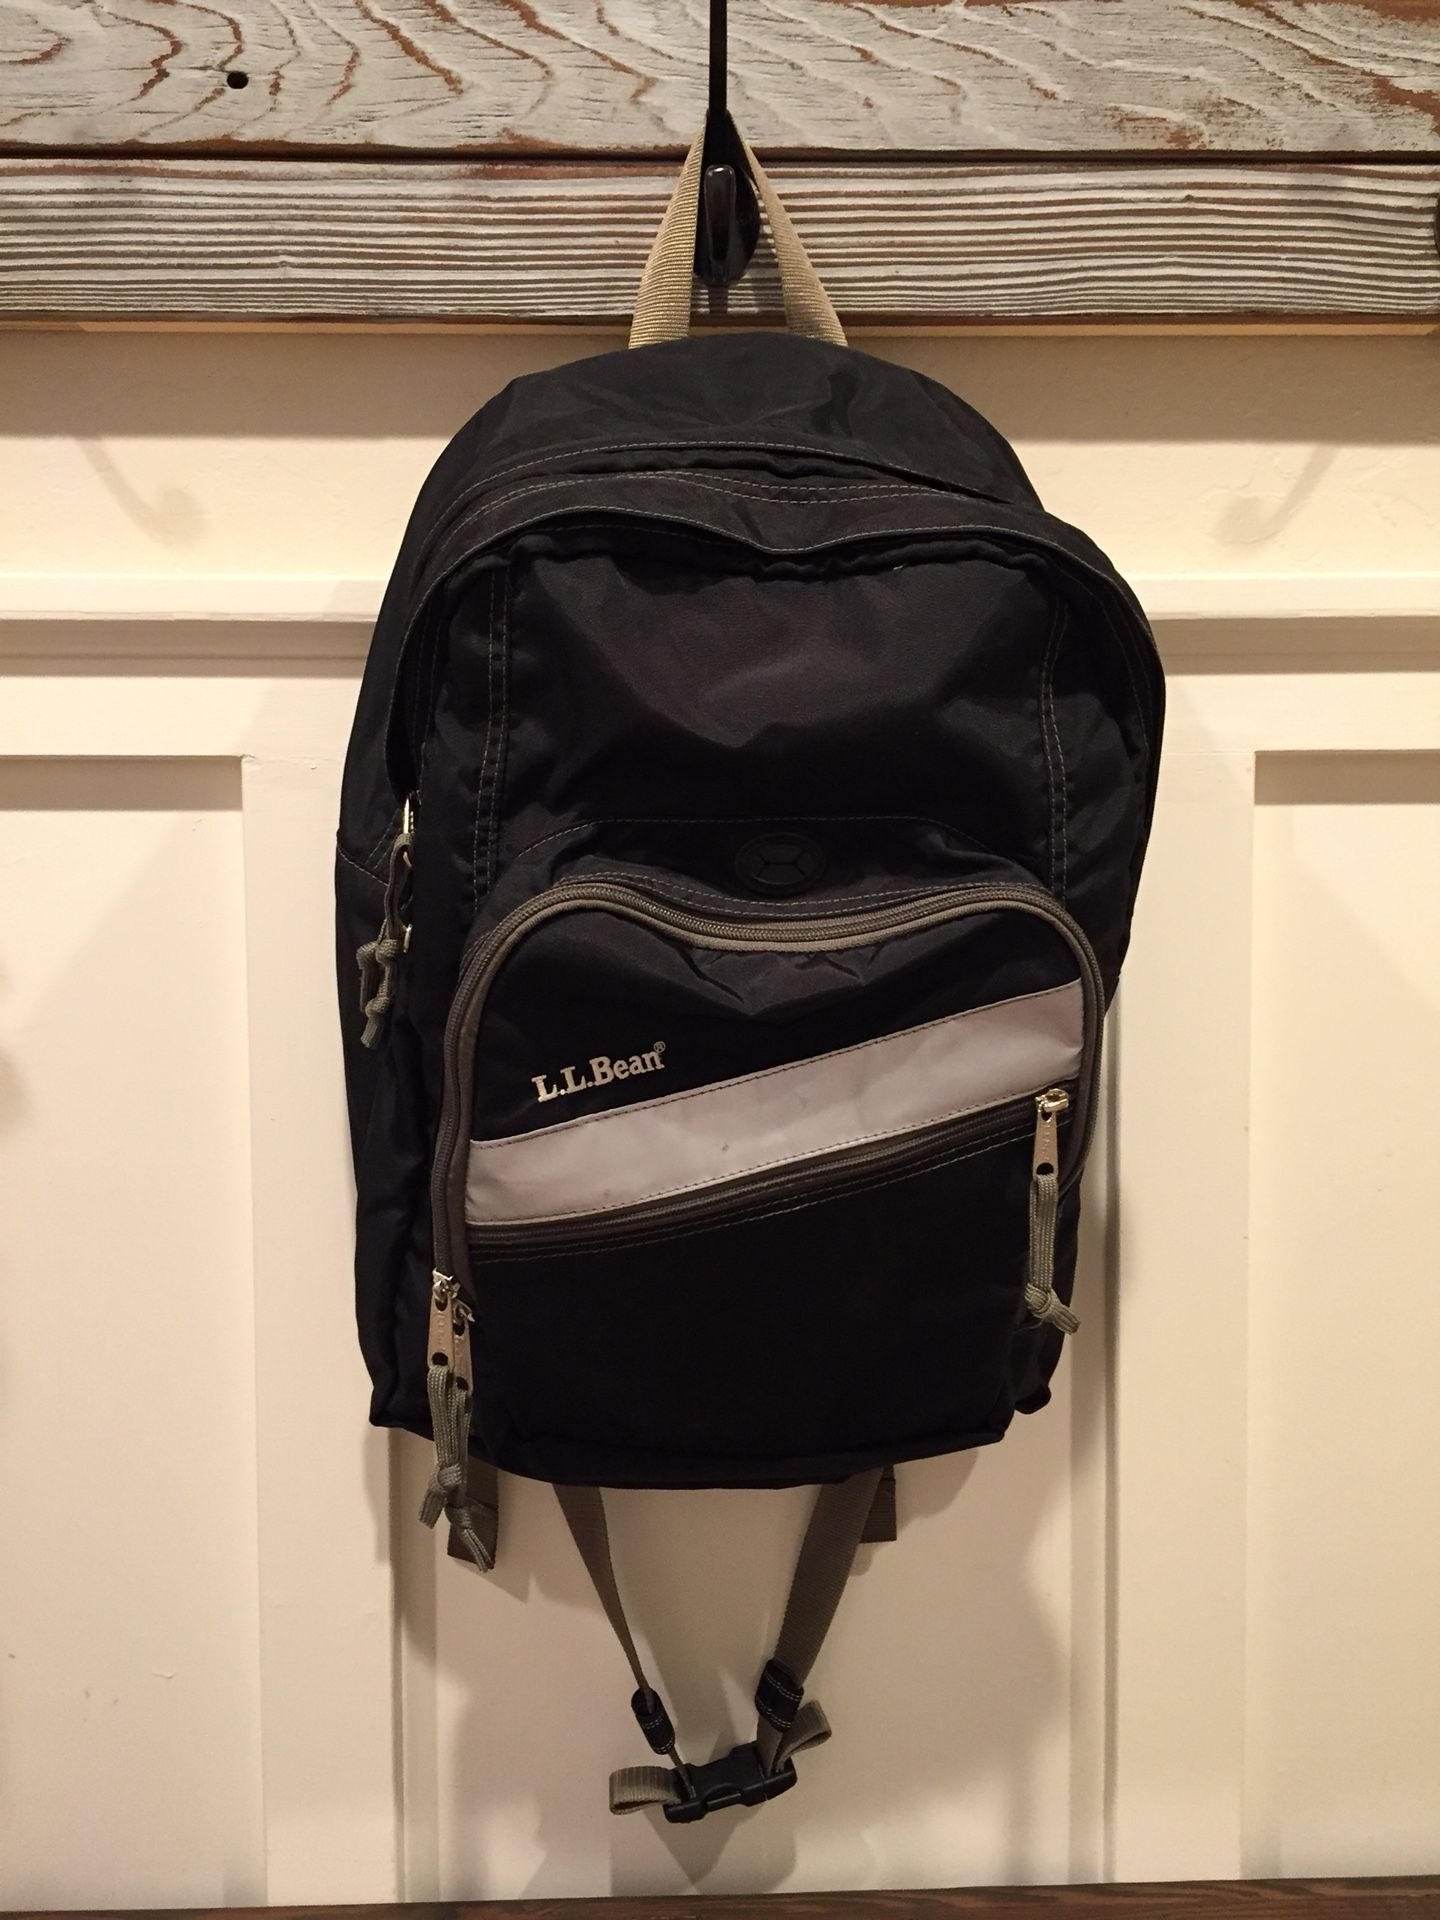 Excellent condition ll bean deluxe black backpack